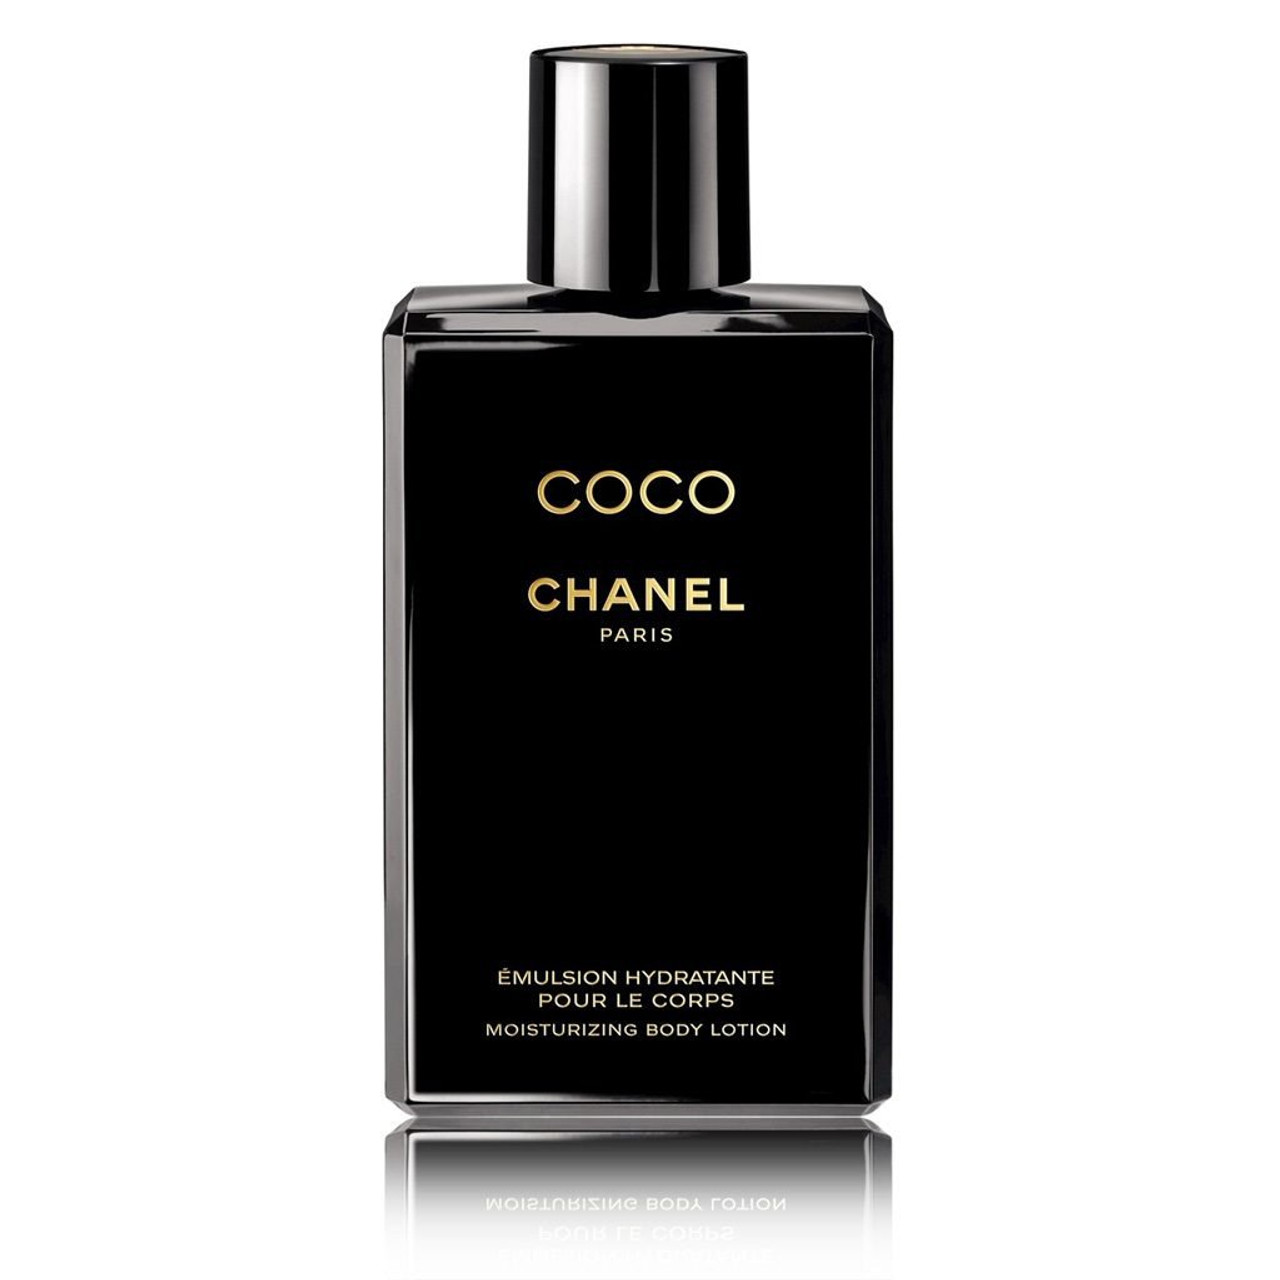 CHANEL COCO by Chanel BODY LOTION 5 OZ - Womens